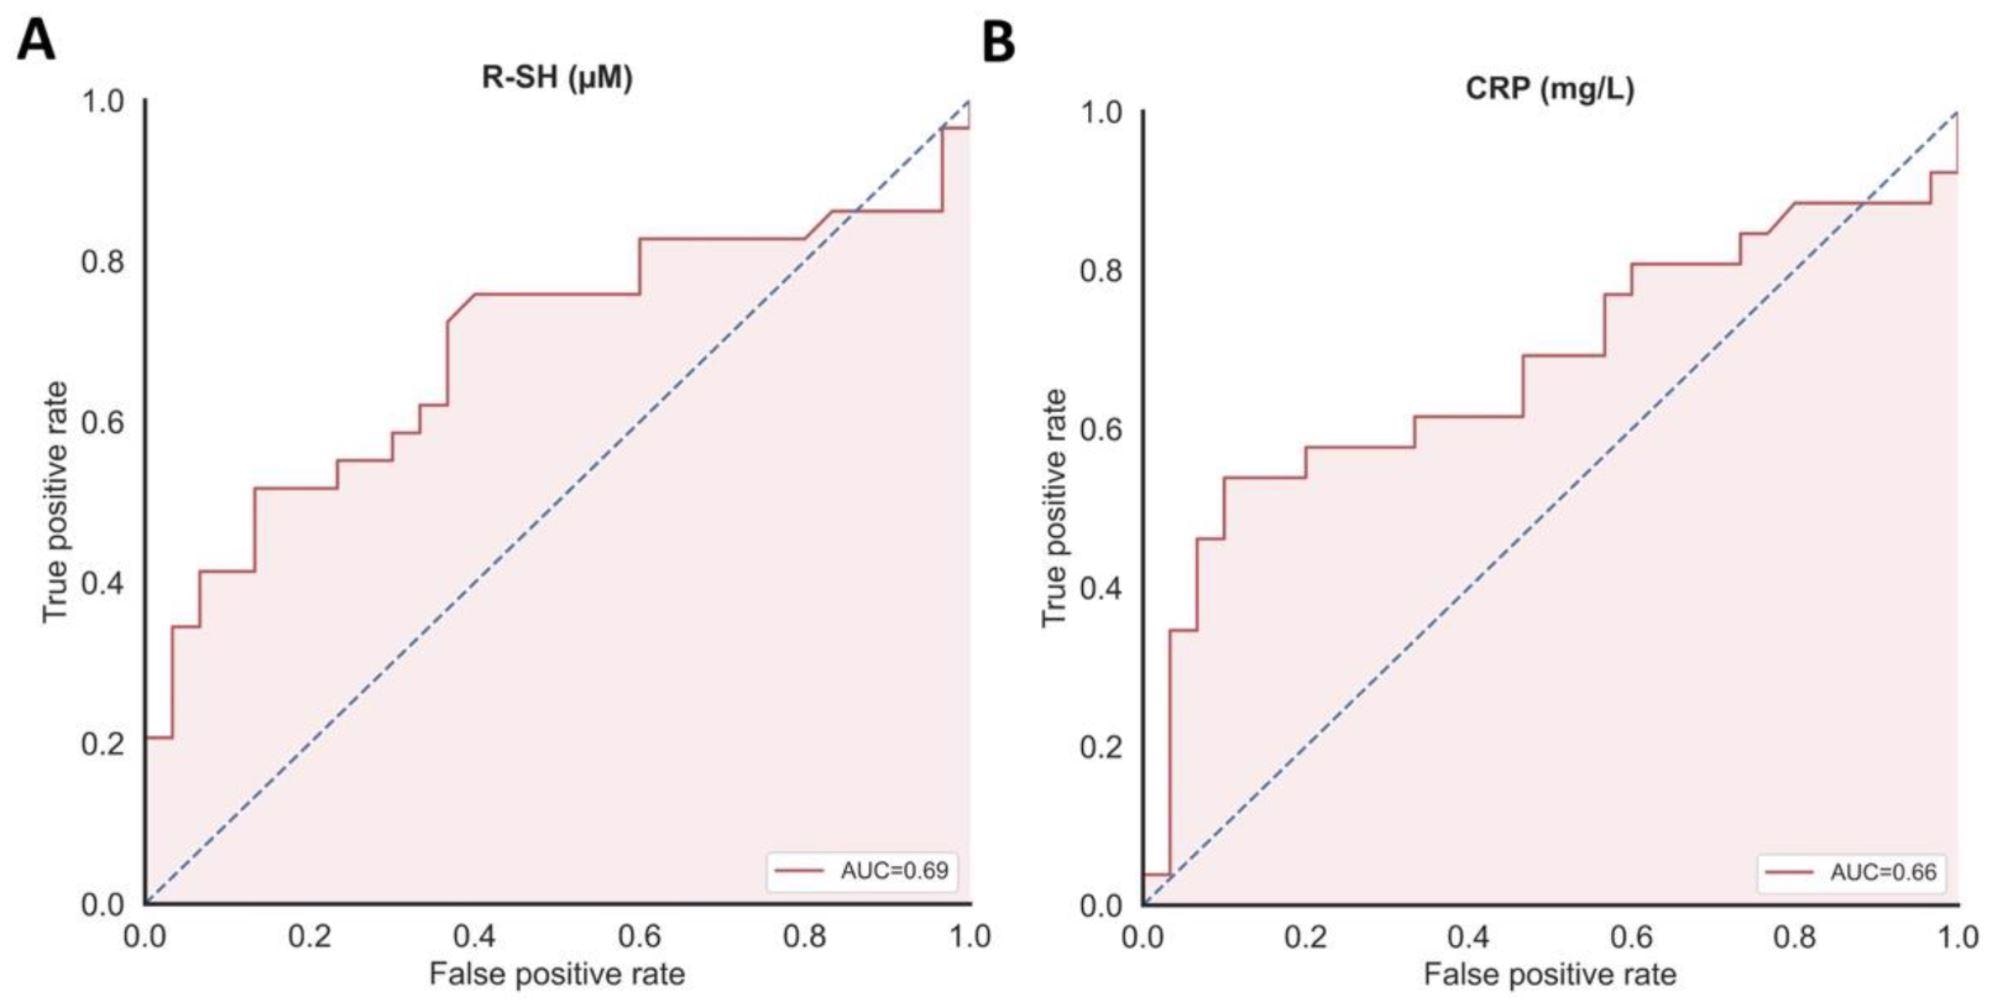 (A) Serum concentrations of free thiols (µM) significantly discriminated between patients with COVID-19 and healthy controls and (B) showing a slightly higher discriminative capacity as compared to CRP concentrations (mg/L).